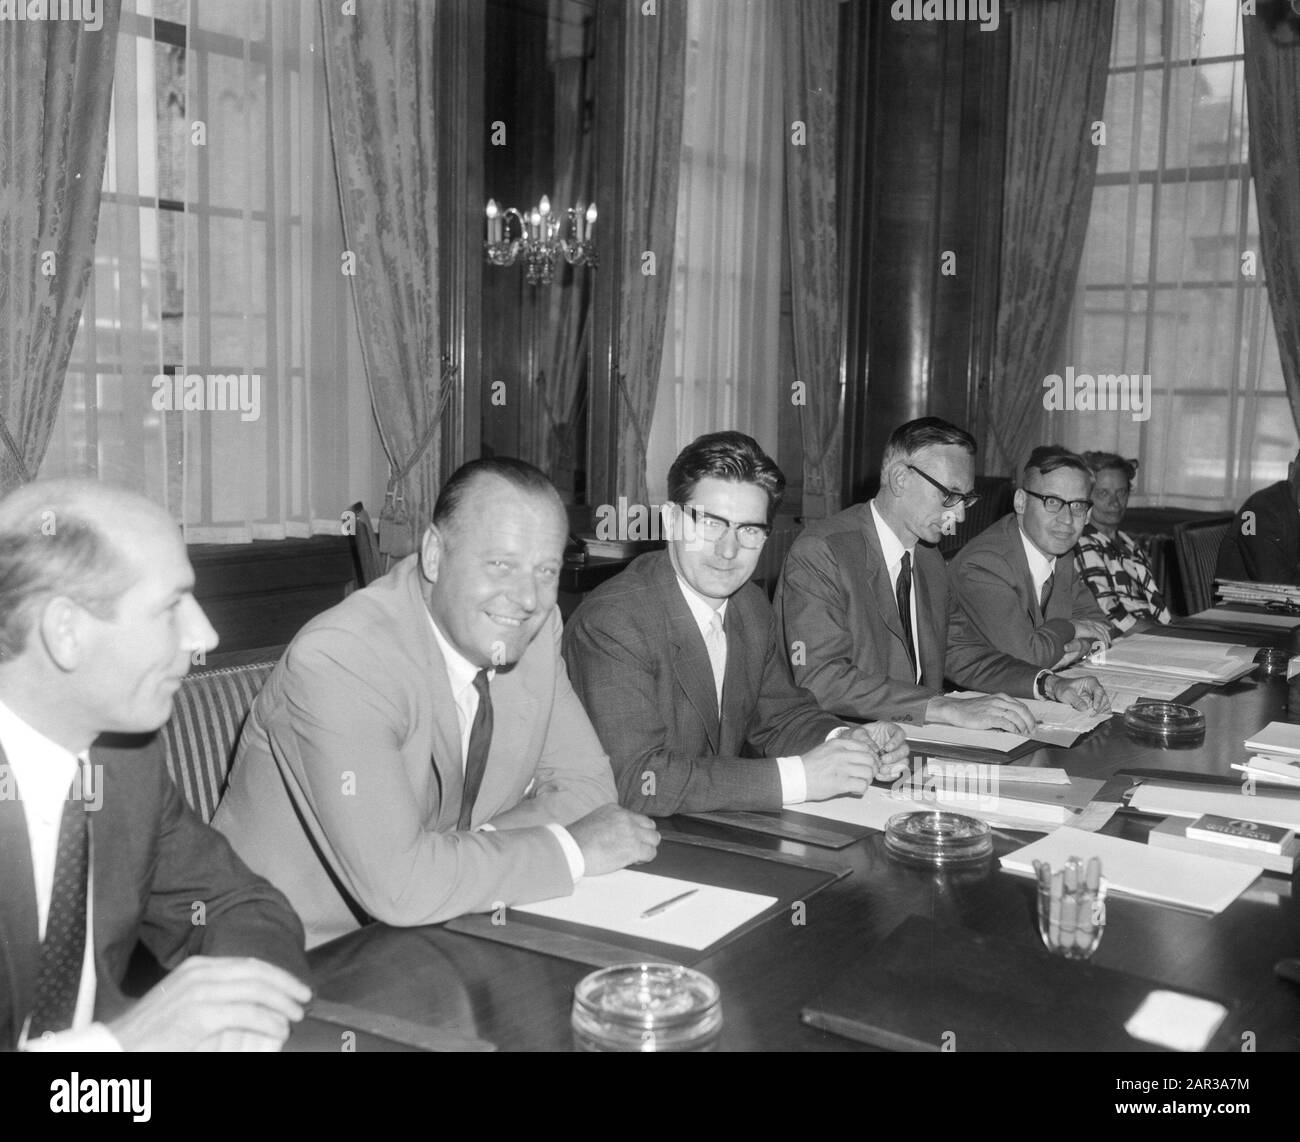 Issue Chinese technicians in Lower Chamber, v.l.n.r. Bos, Blaisse, Westerterp, Staats, Van der Stoel, Minister Diepenhorst and Miss Rutgers Date: 5 August 1966 Location: The Hague, Zuid- Holland Personal name: Bos, Diepenhorst, I.A. Stock Photo